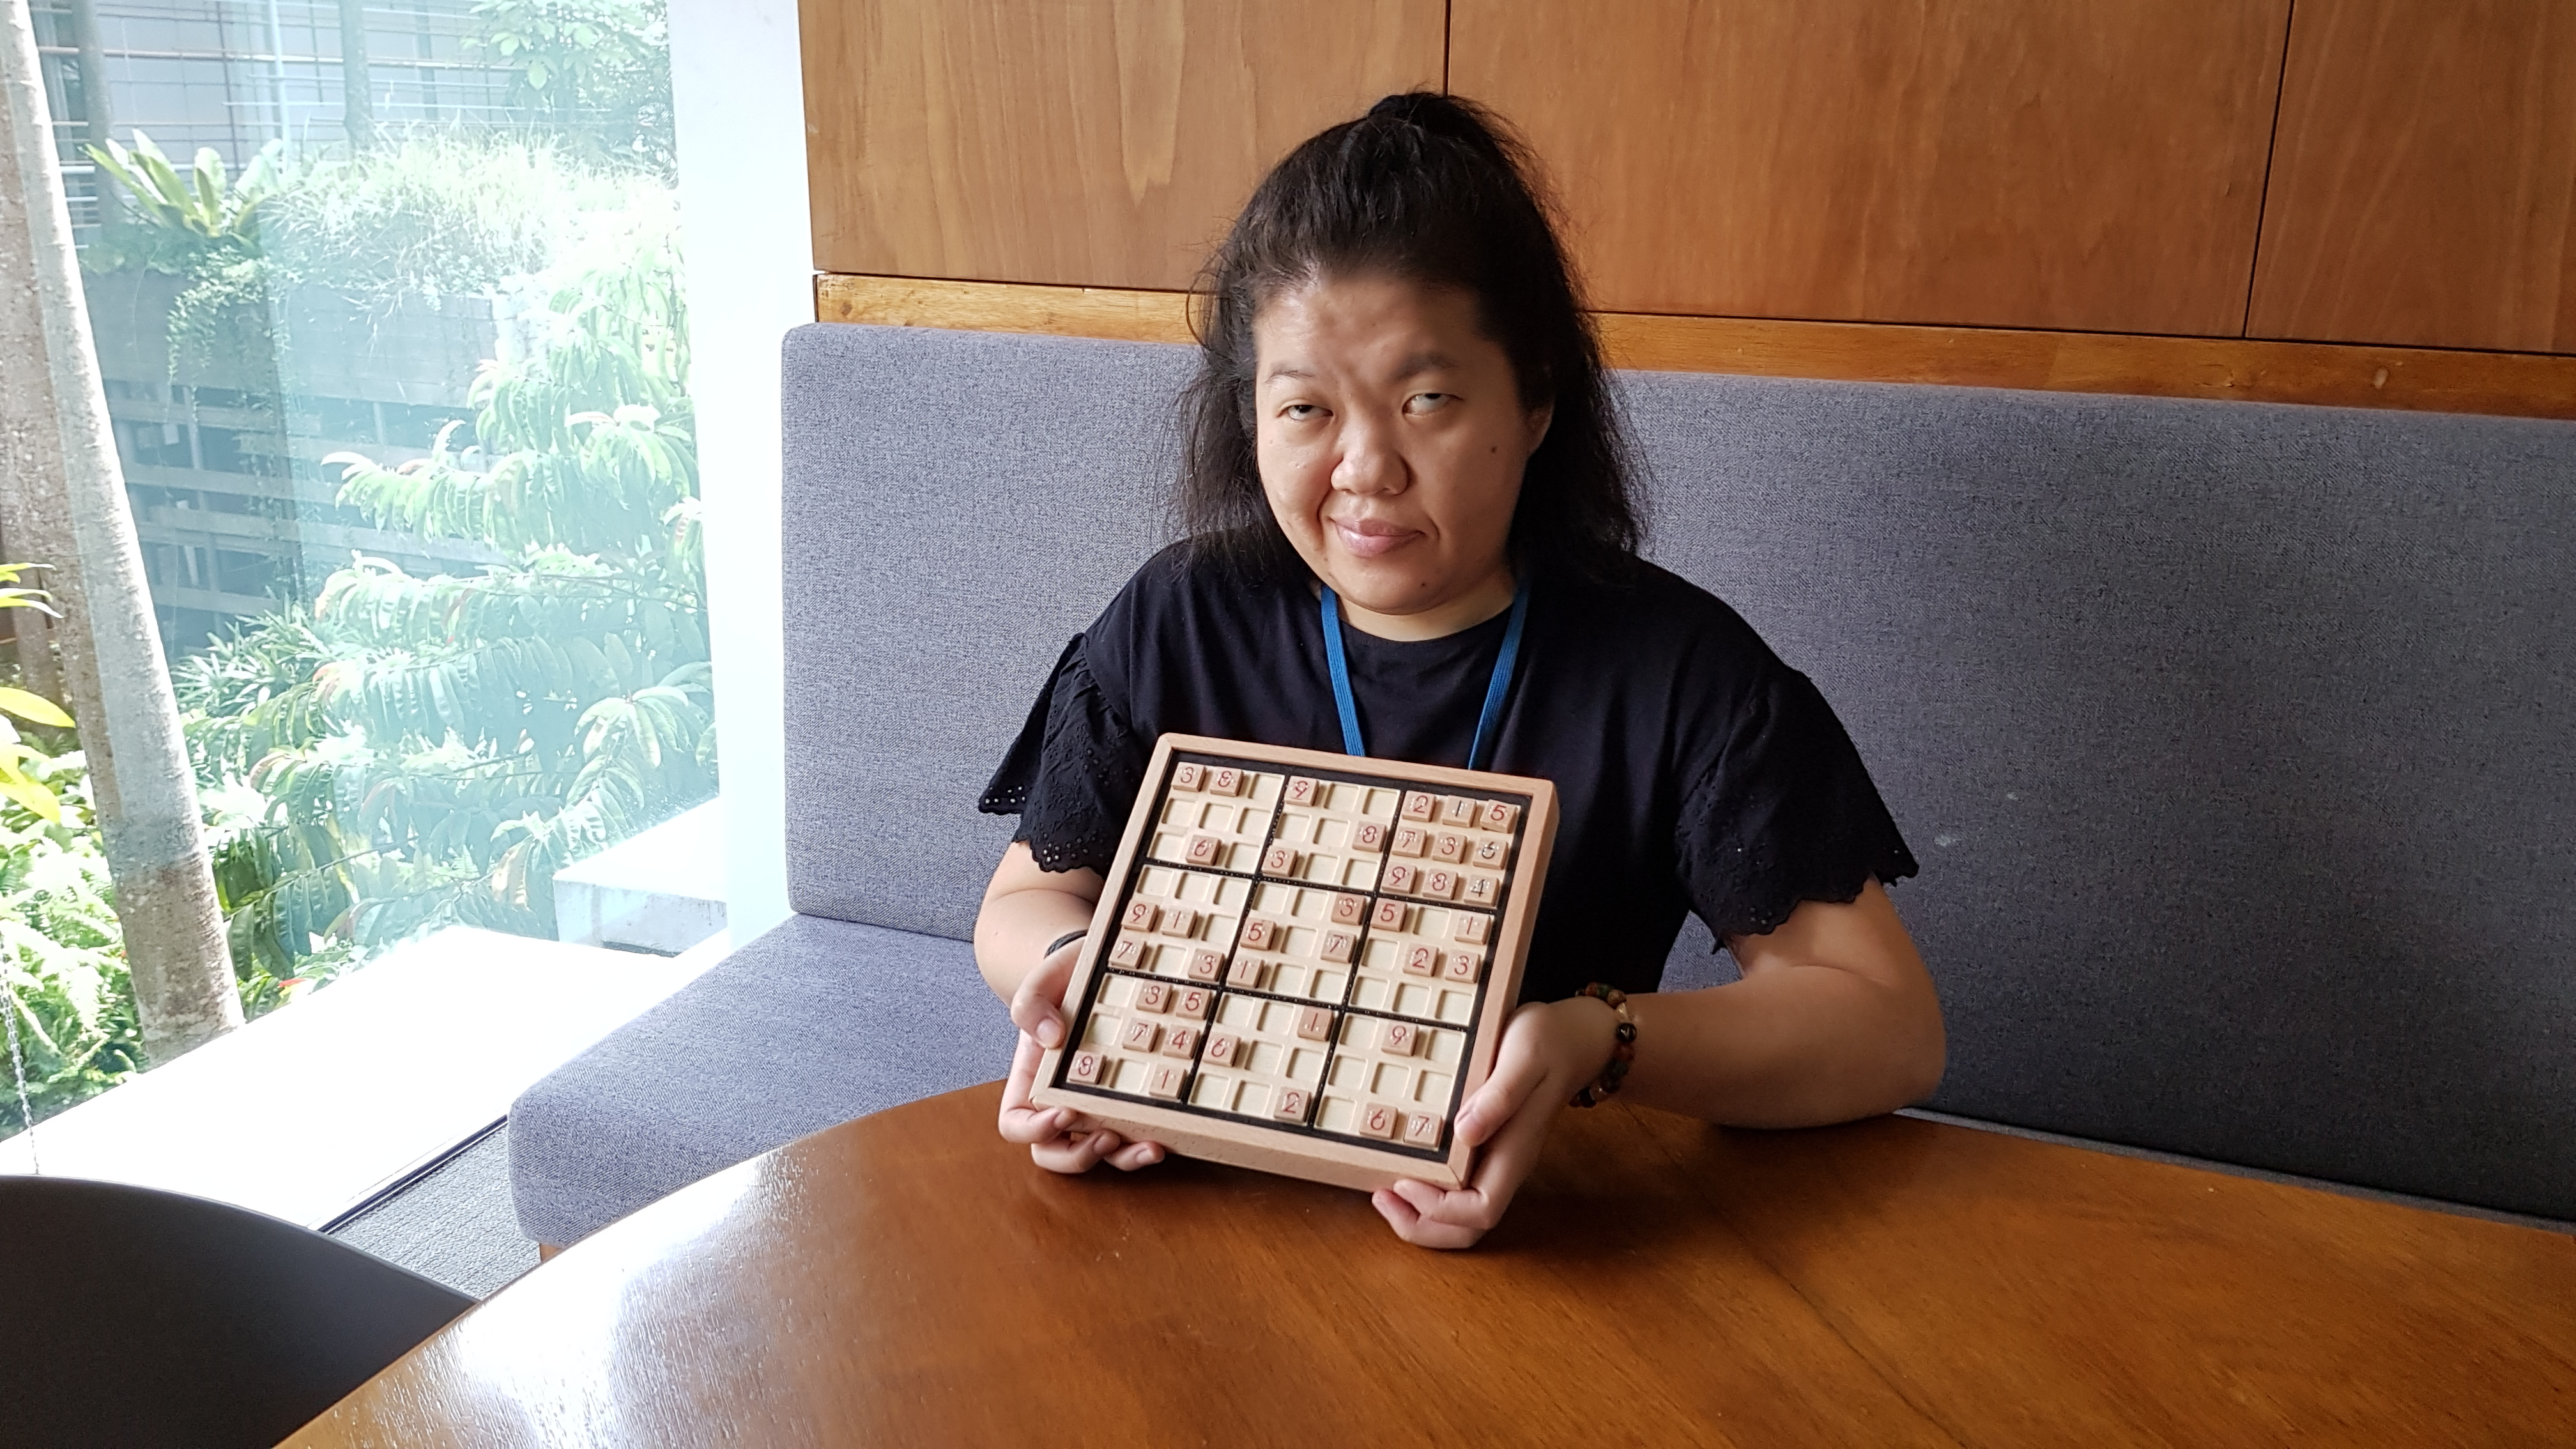 Siew Ling posing with her adapted wooden Sudoku set. 